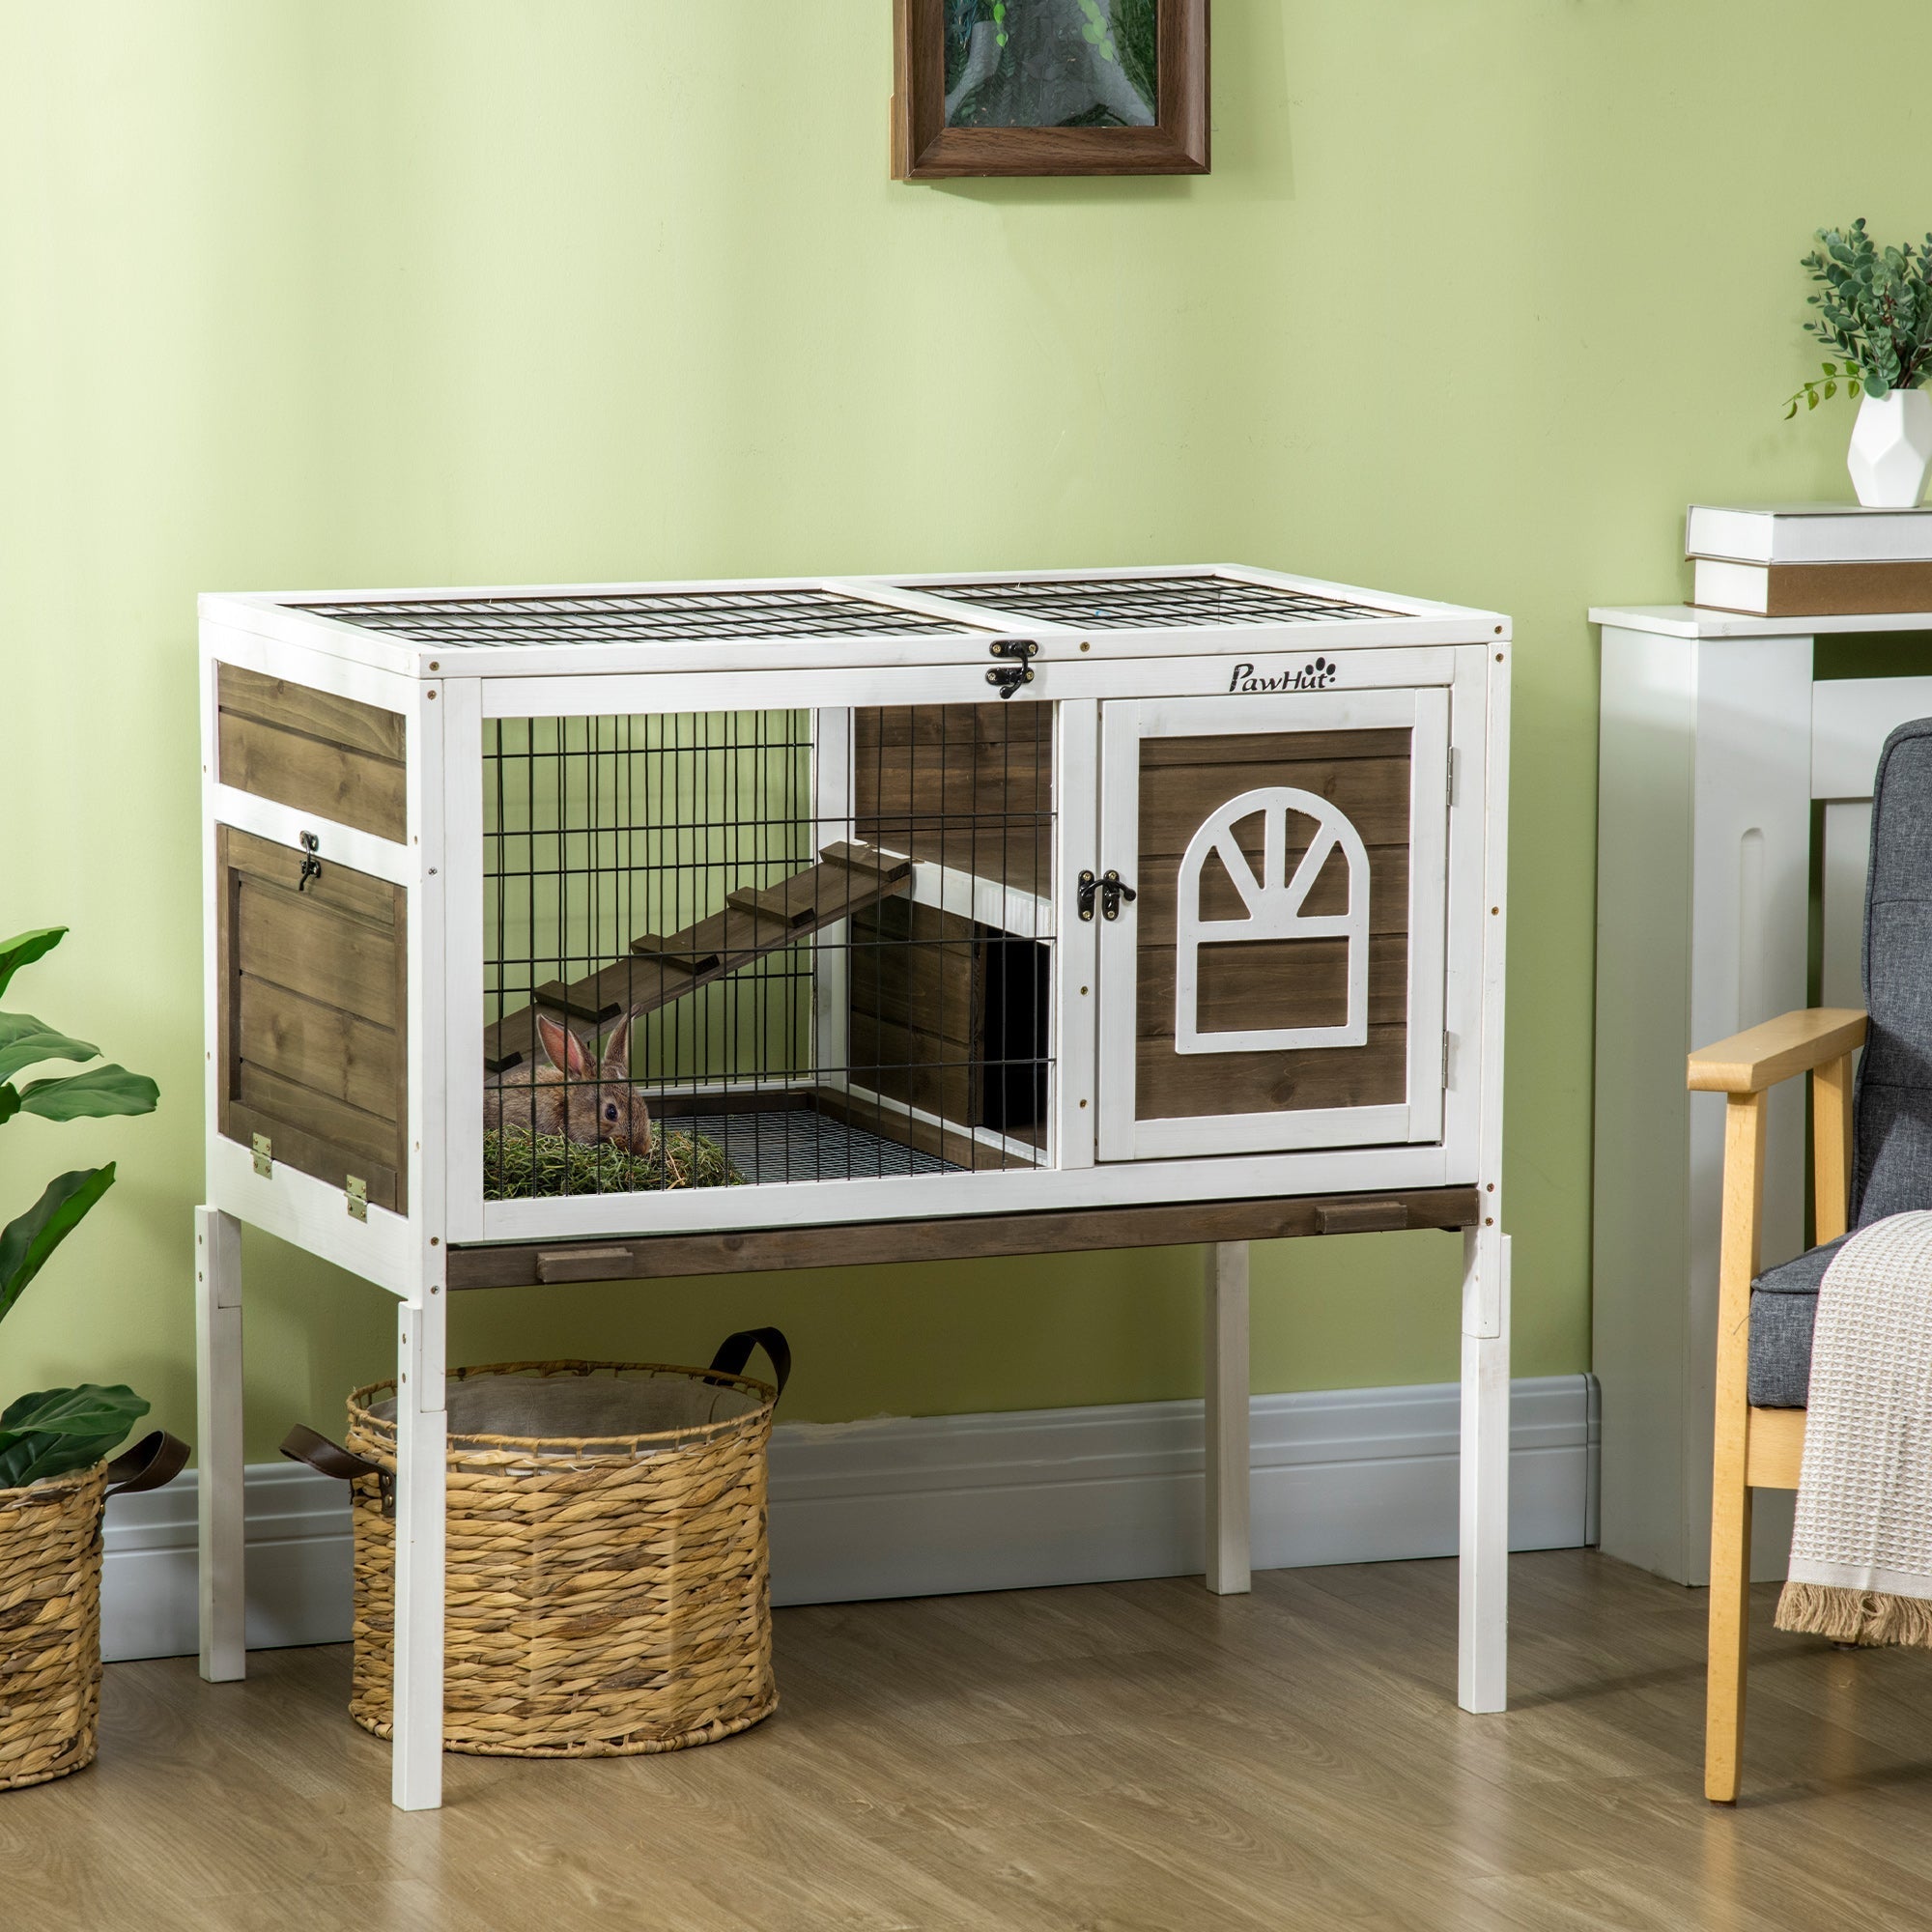 Wooden Rabbit Hutch with Openable Roof, Elevated Guinea Pig Cage with Ladder, Small Animal House for Indoor Use with Slide-out Tray, 90 x 53 x 87cm, Coffee Brown, PawHut,